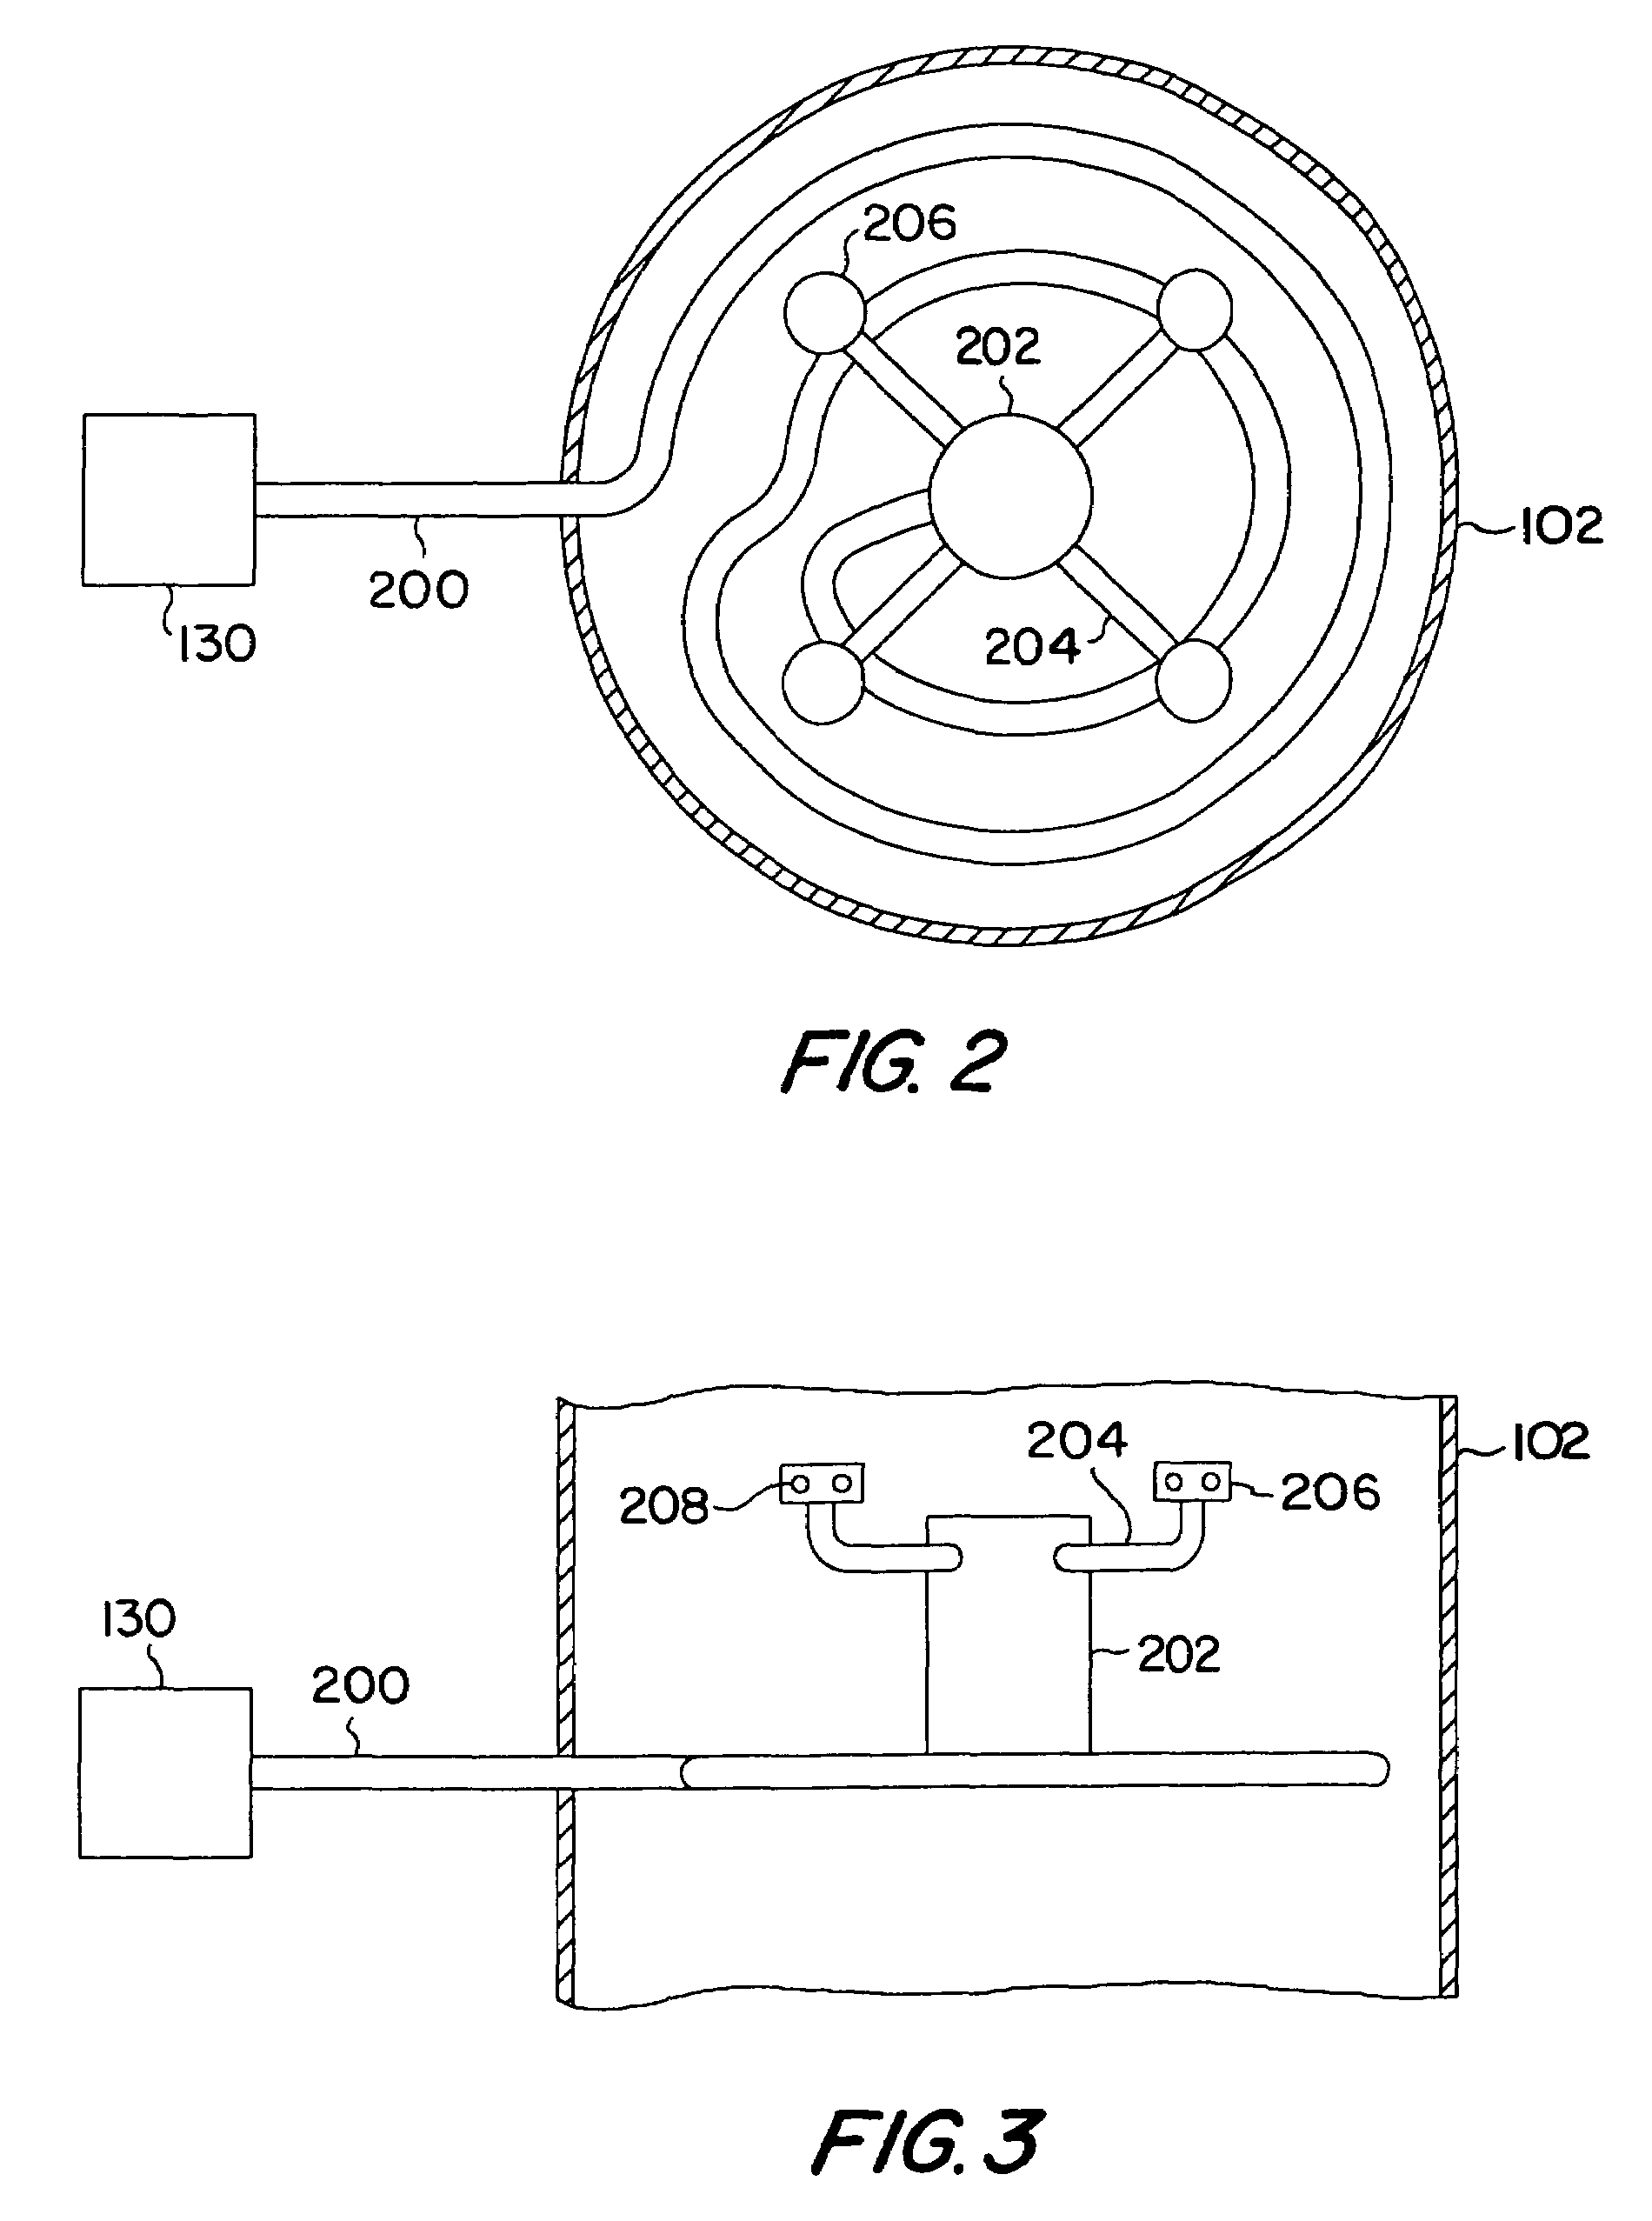 Compact reformer and water gas shift reactor for producing varying amounts of hydrogen